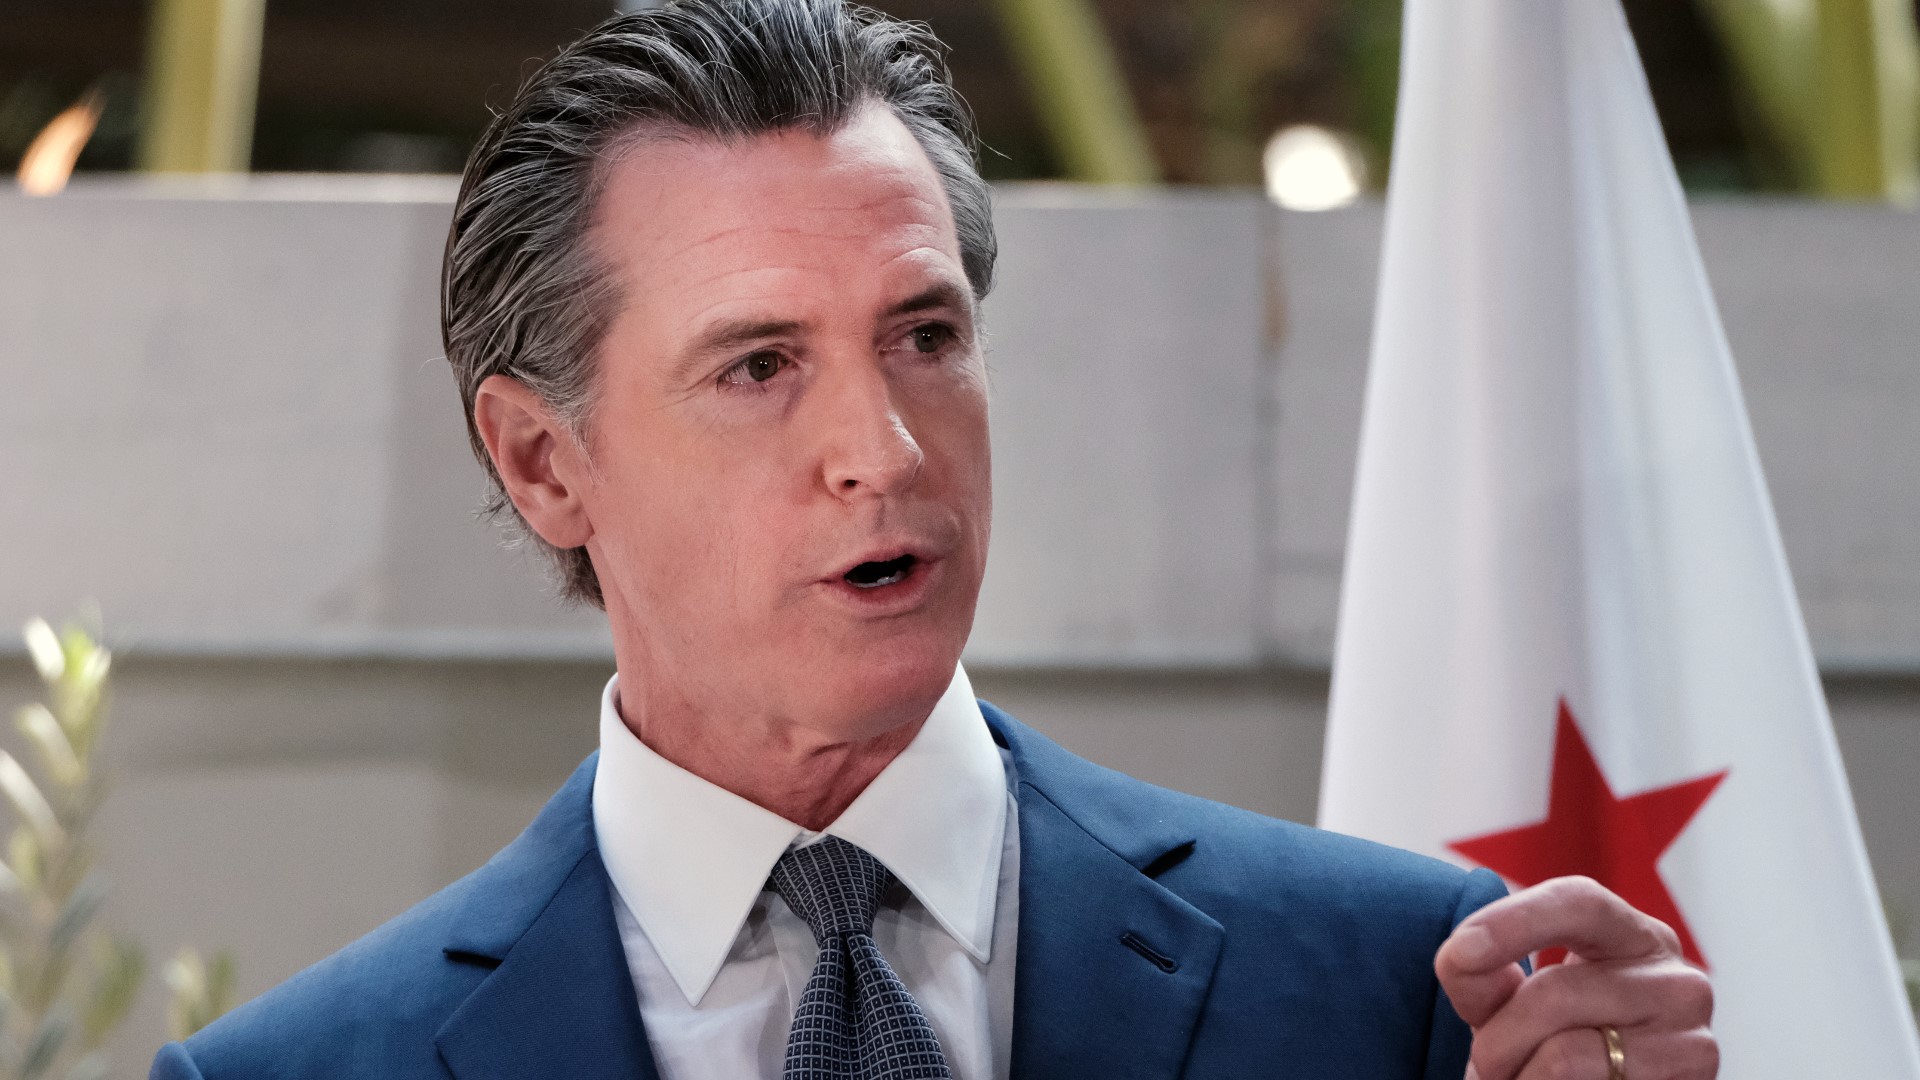 Gov. Newsom is on the ballot for the General Election, but he won't be in your voter guide.